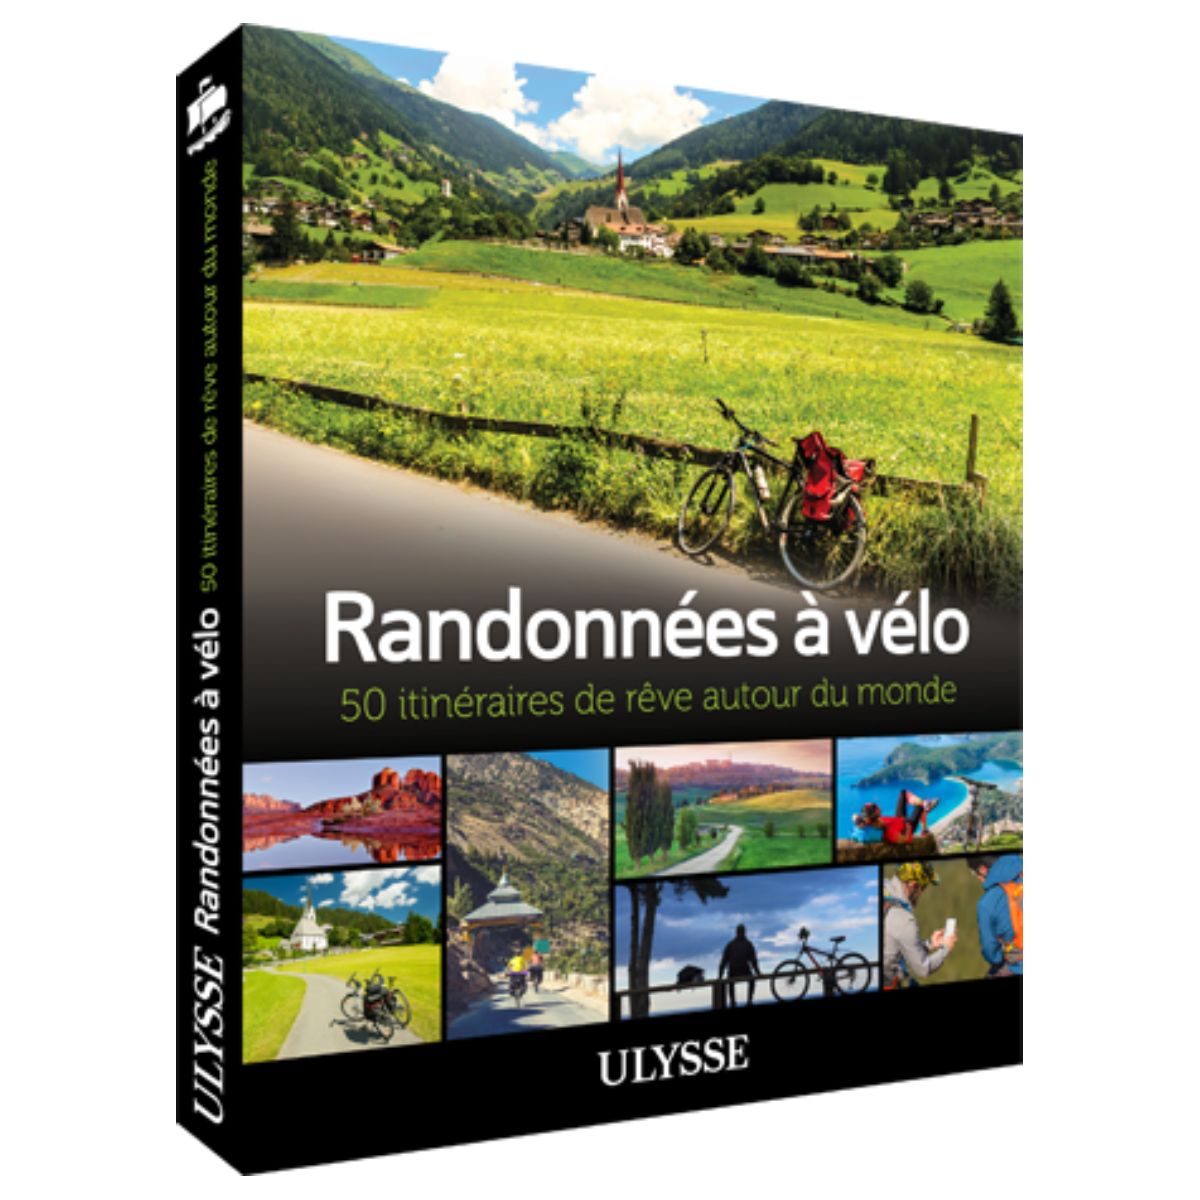 Ulysse Guide to Bike Tours - 50 Dream Itineraries Around the World